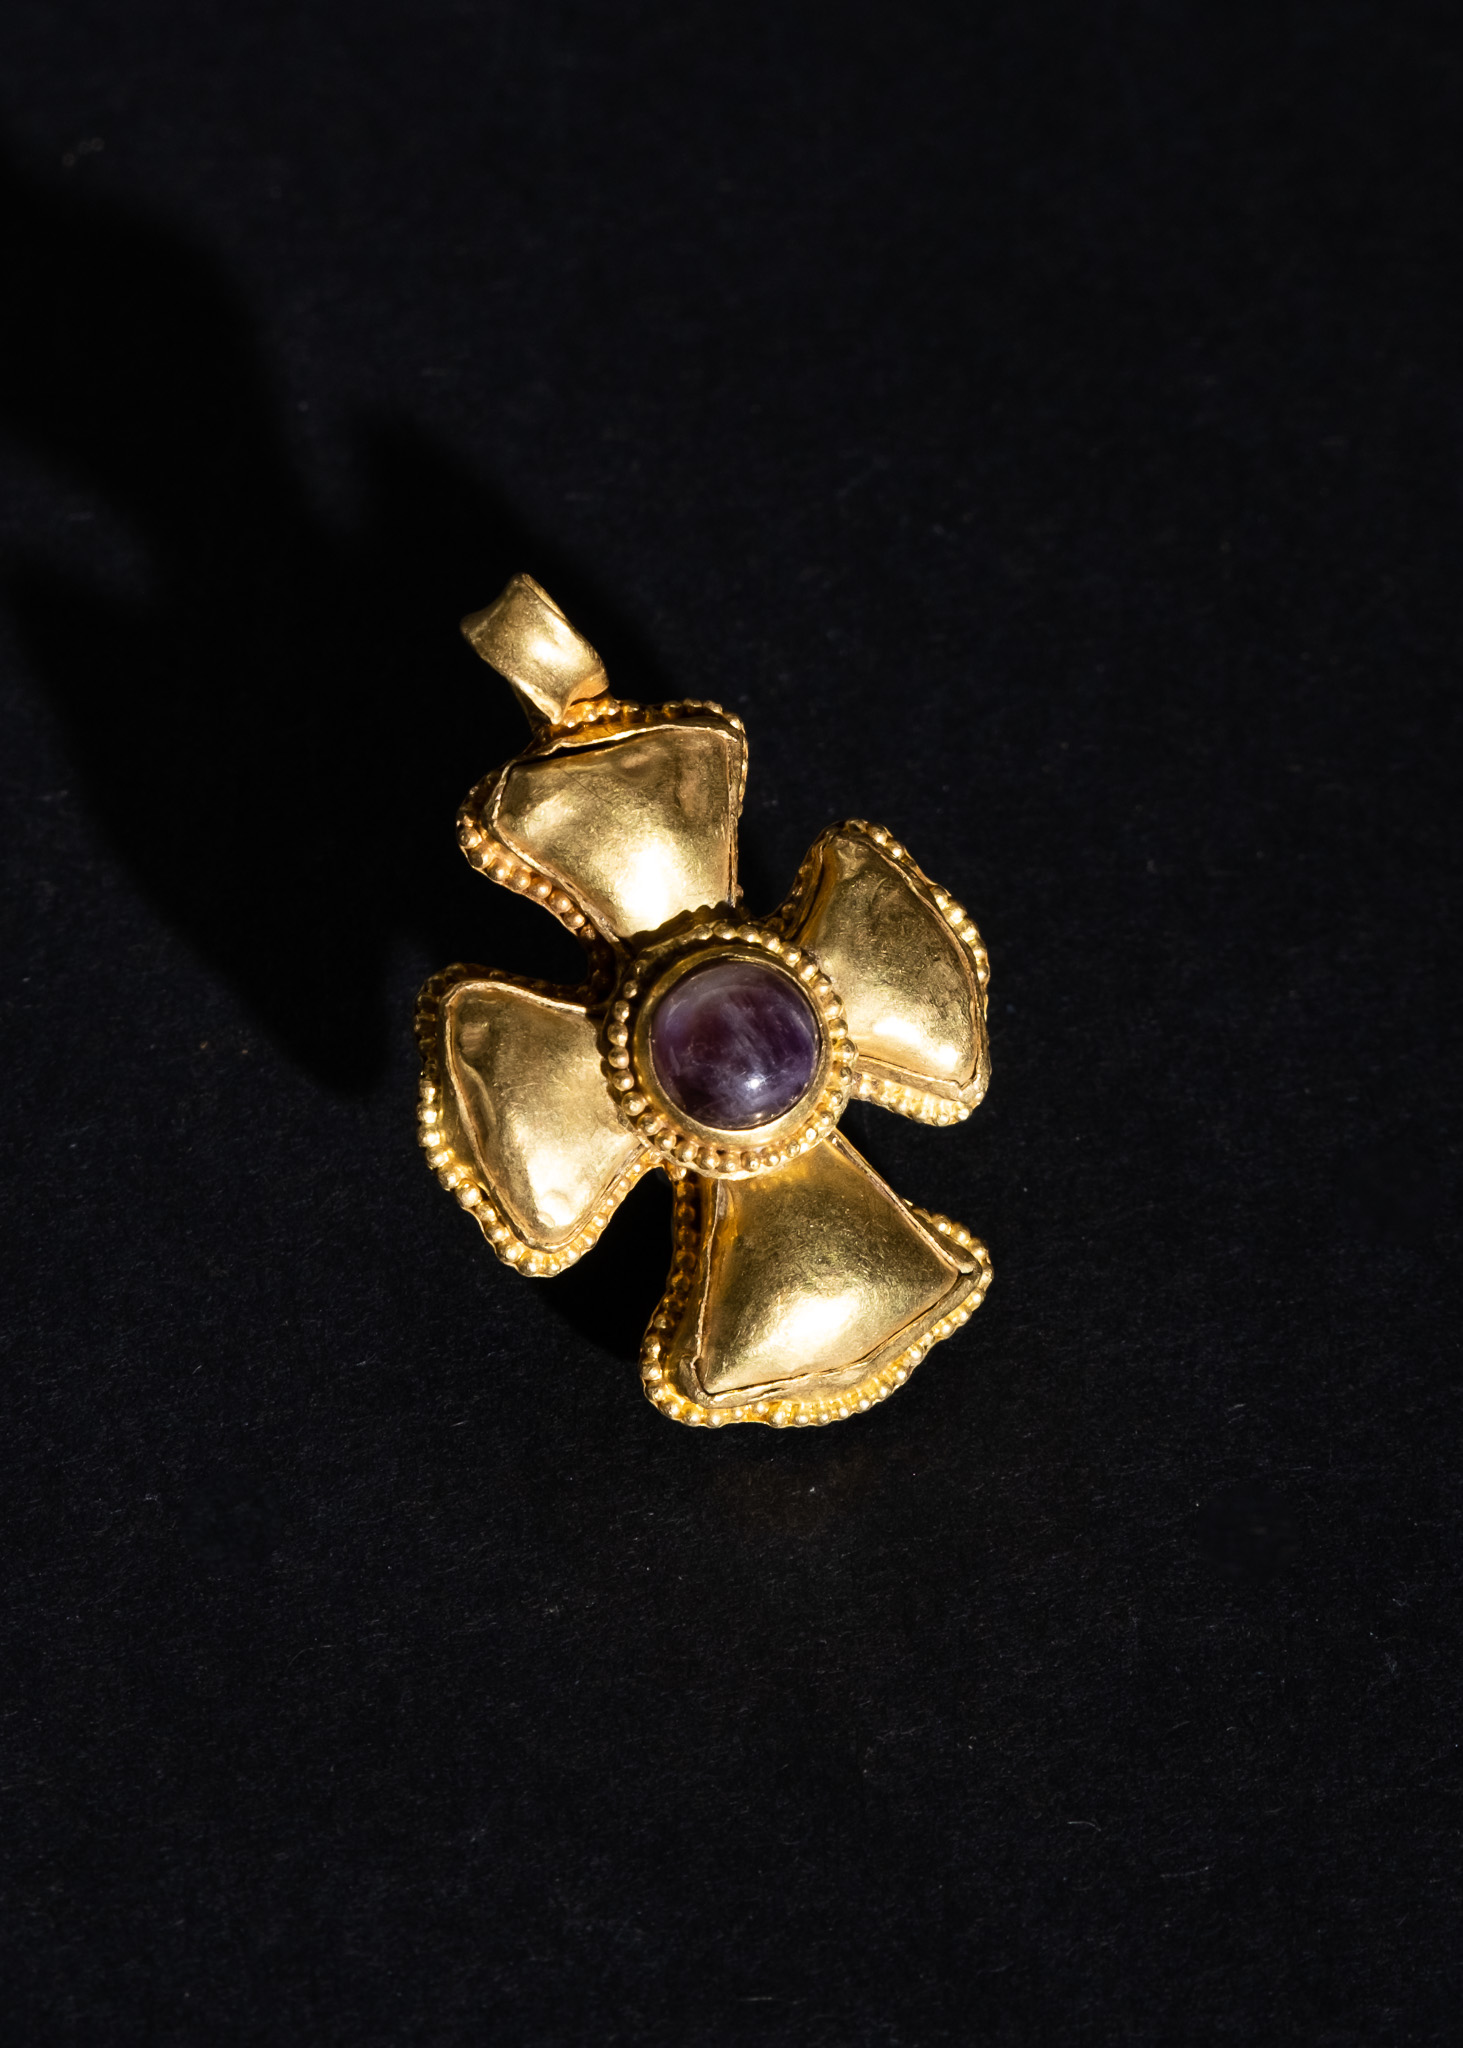 A GOLD BYZANTINE CROSS WITH AN AMETHYST CENTRE STONE, CIRCA 3RD-5TH CENTURY